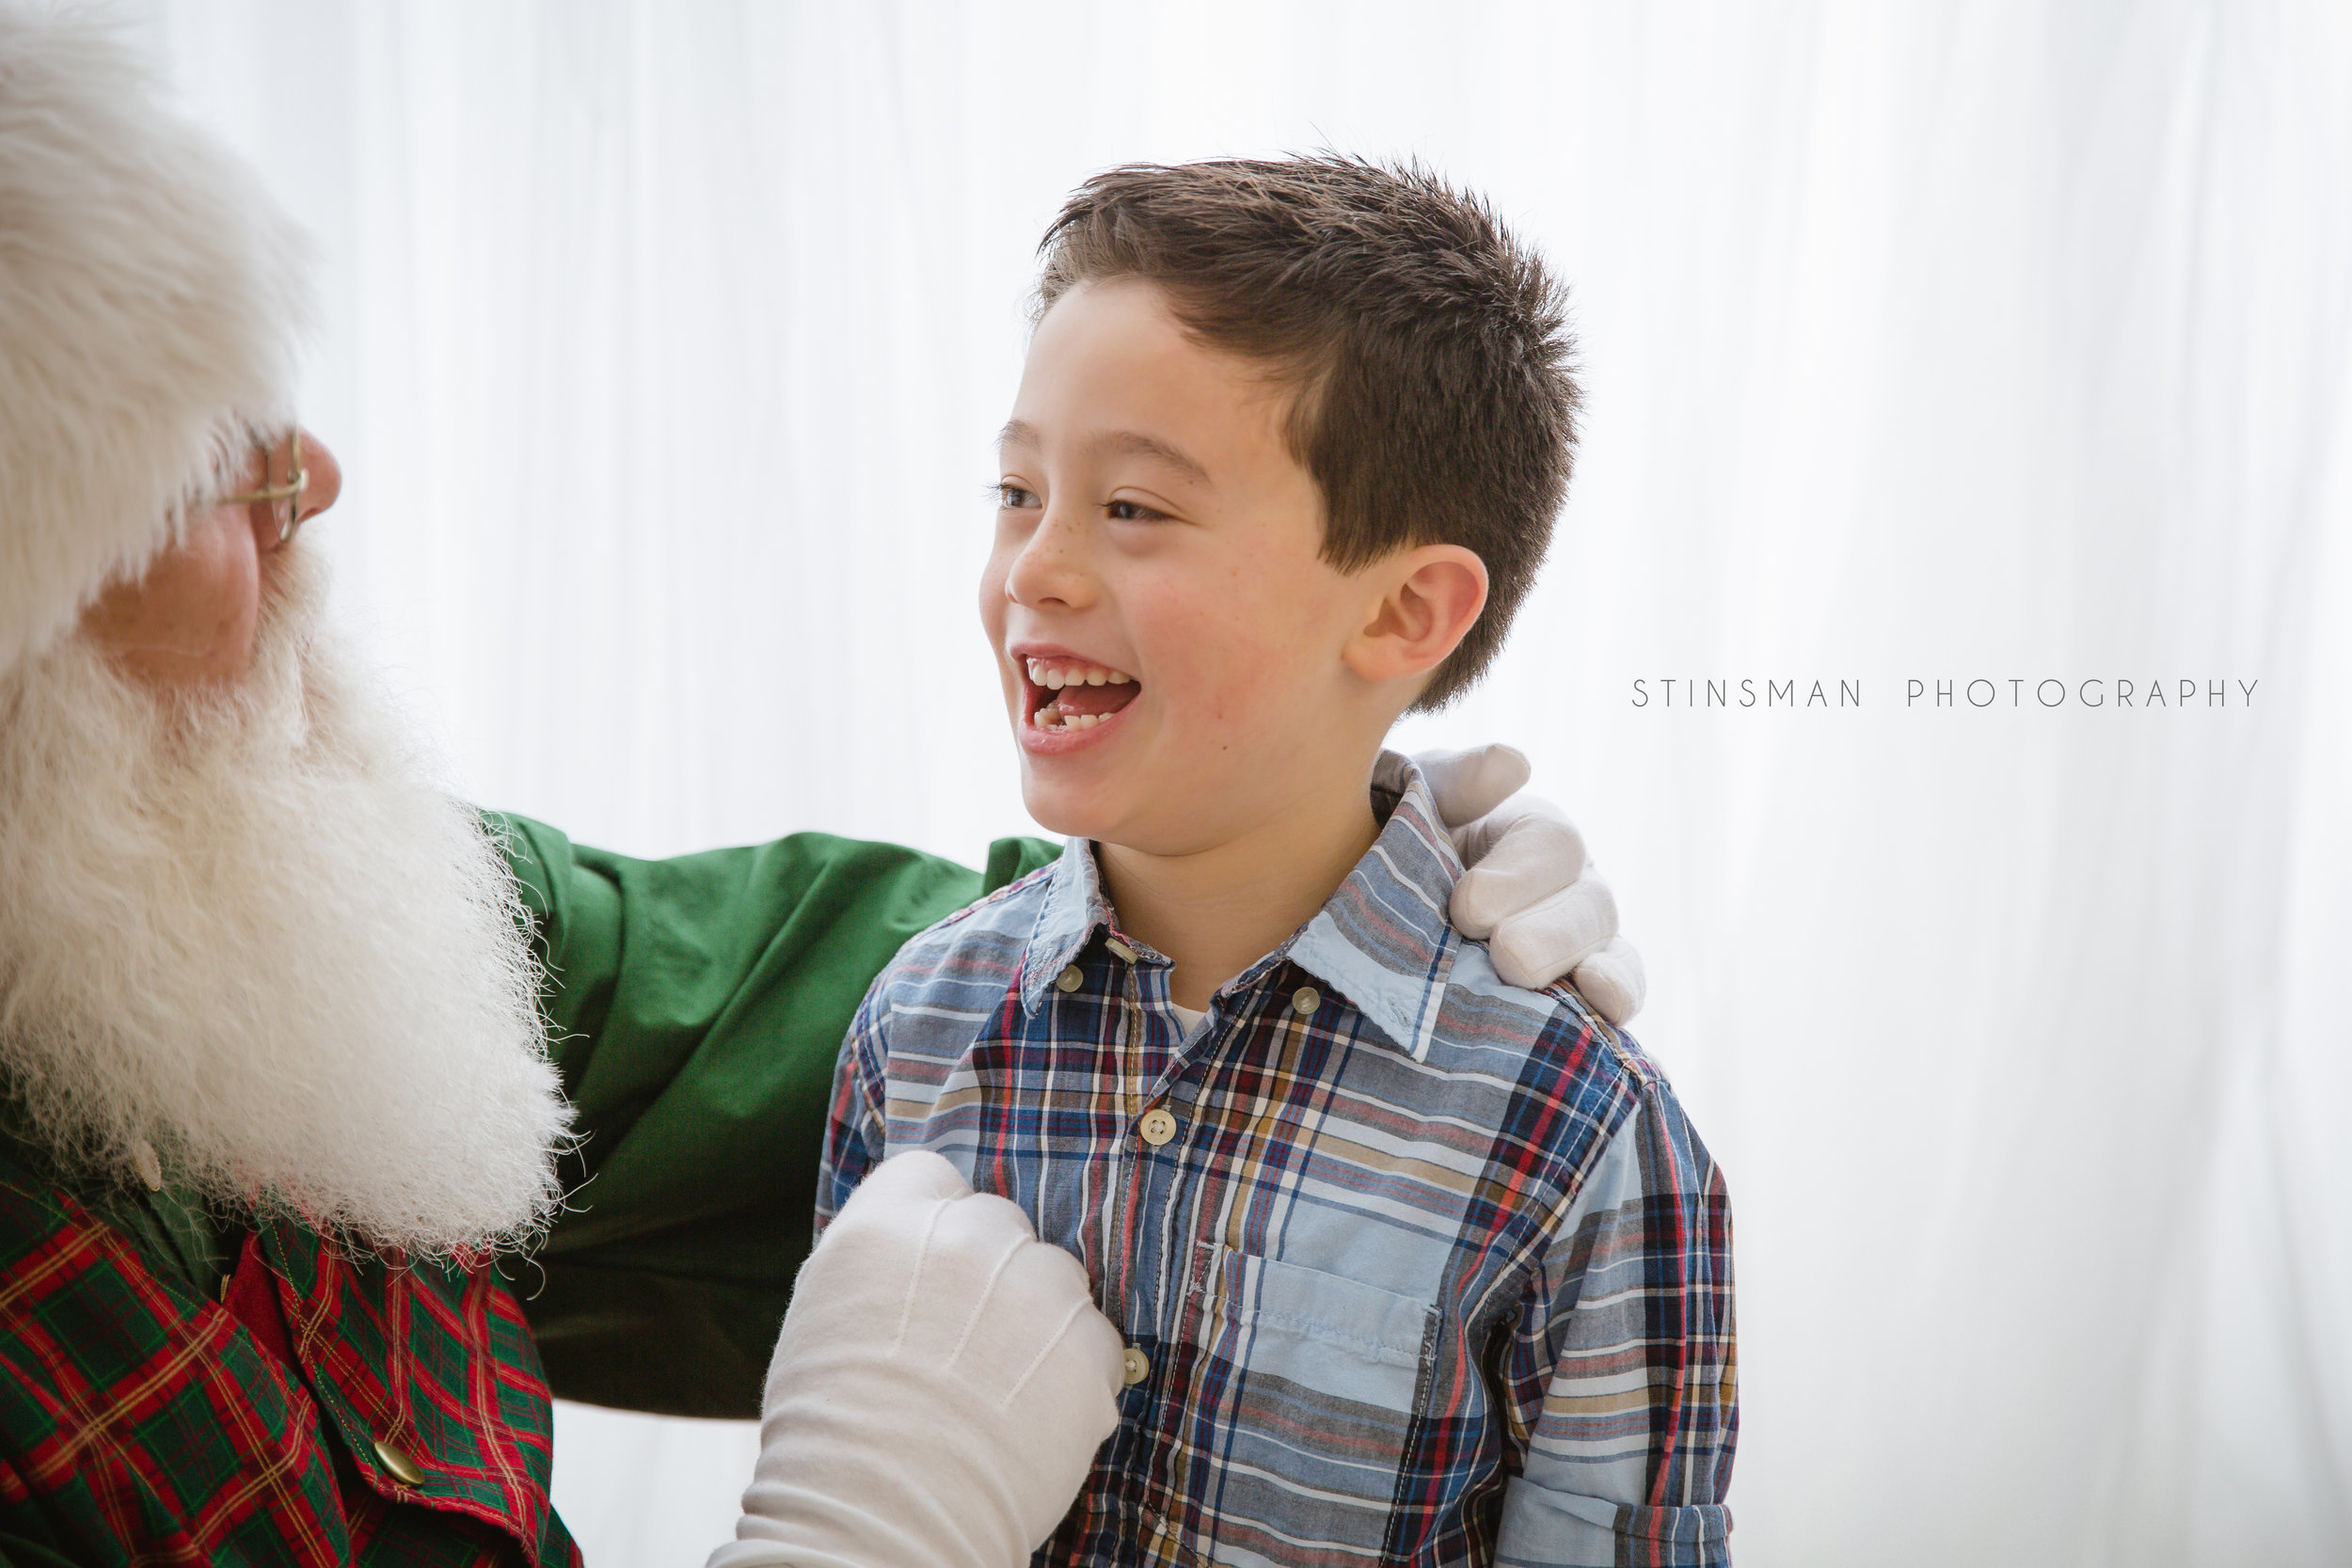 Santa checking out Tyler's lost tooth in burlington nj photo studio